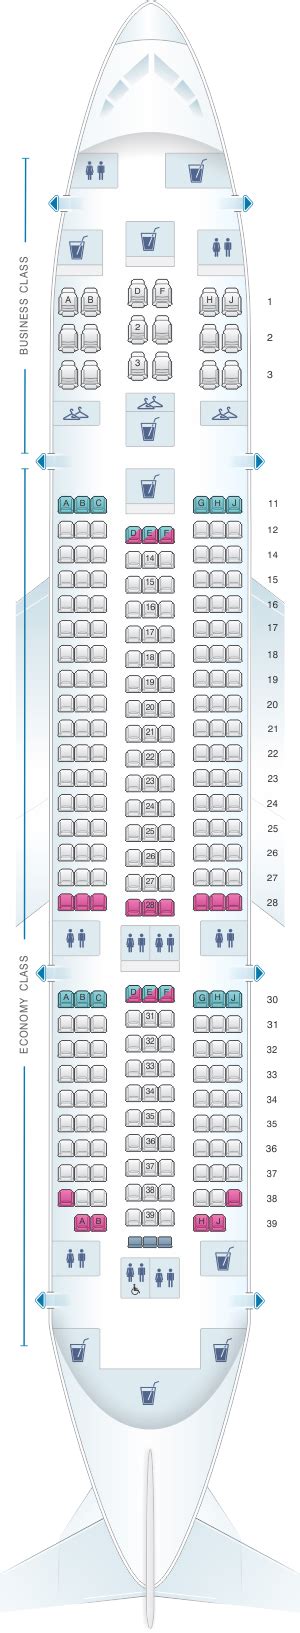 seat maps for air india 787